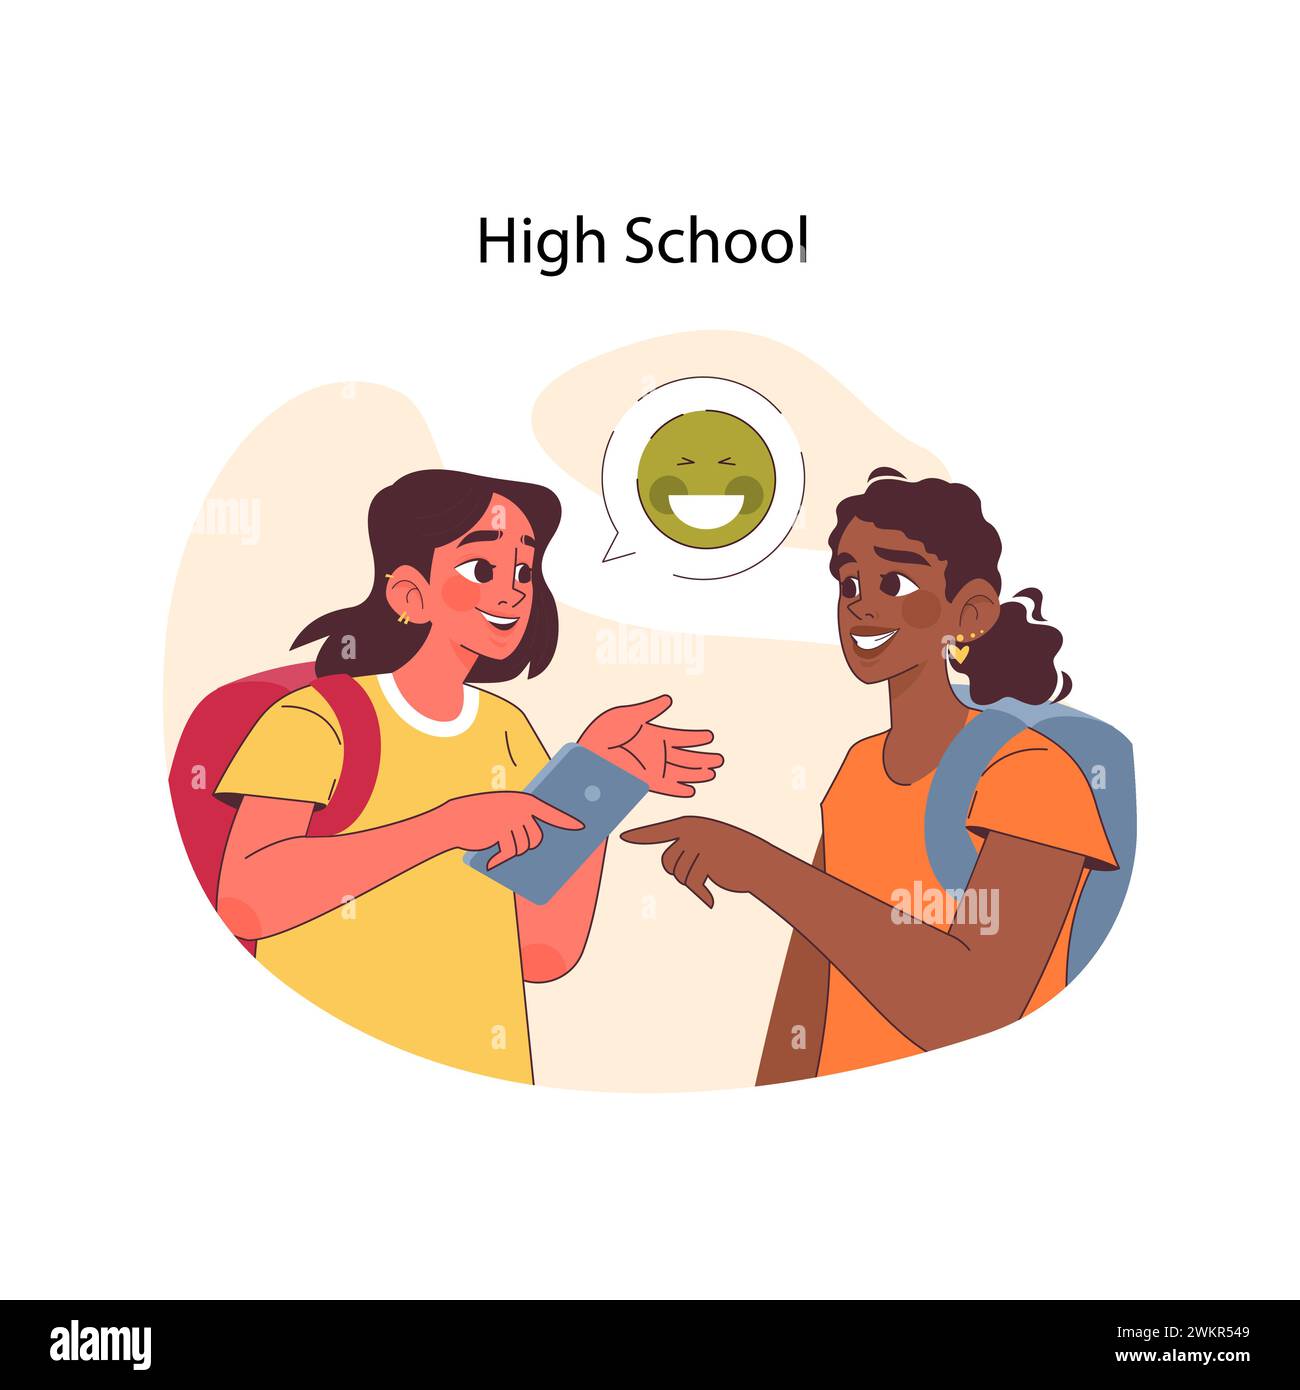 High school concept. Two teenage students exchange cheerful conversation, cracking jokes and having laugh. Social interactions and communication with friends in adolescence. Flat vector illustration. Stock Vector